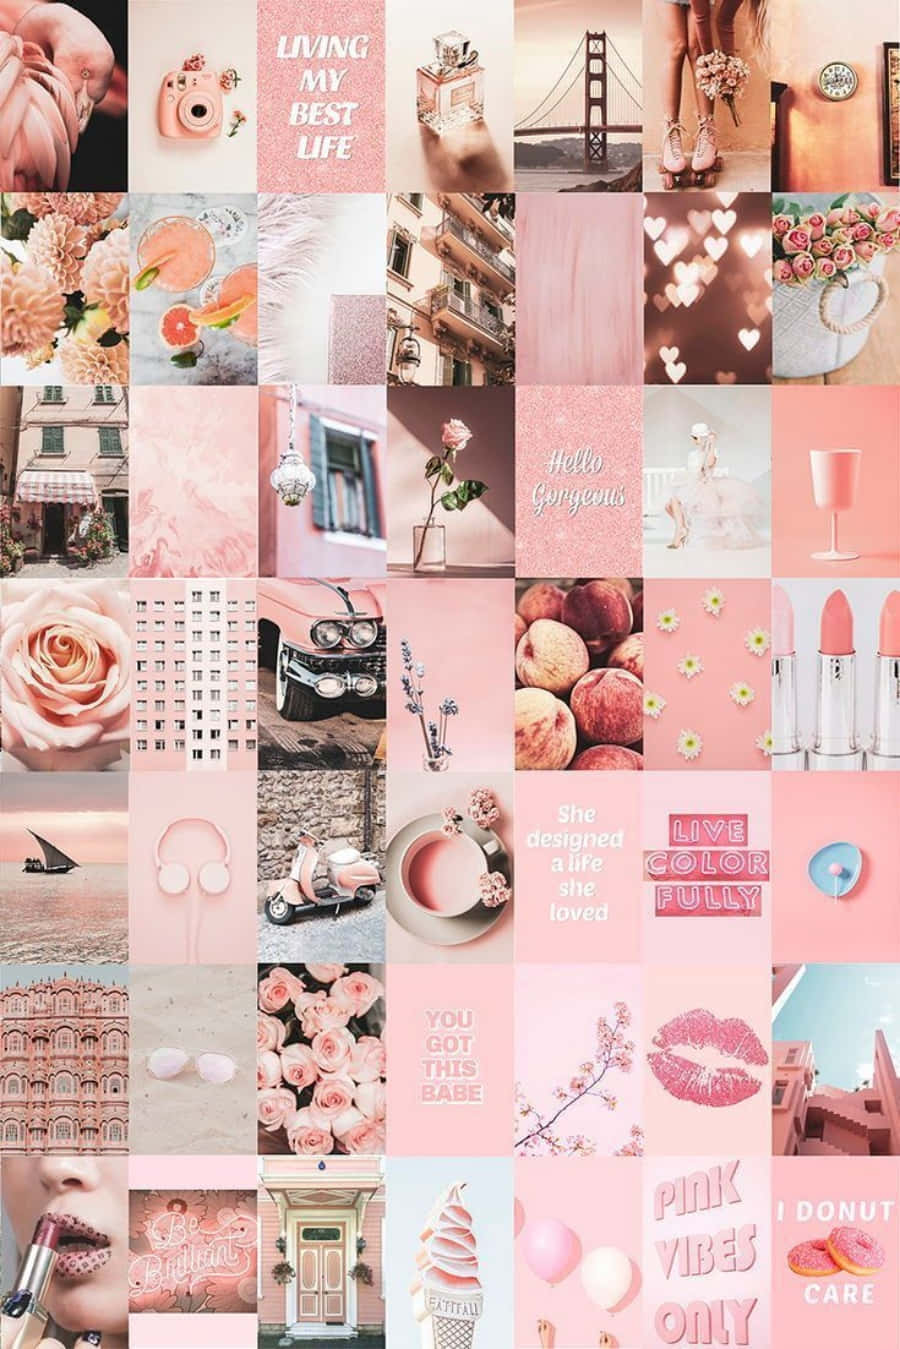 Enjoy This Beautiful Aesthetic Pink Collage To Bring A Little Extra Color And Style To Your World. Background